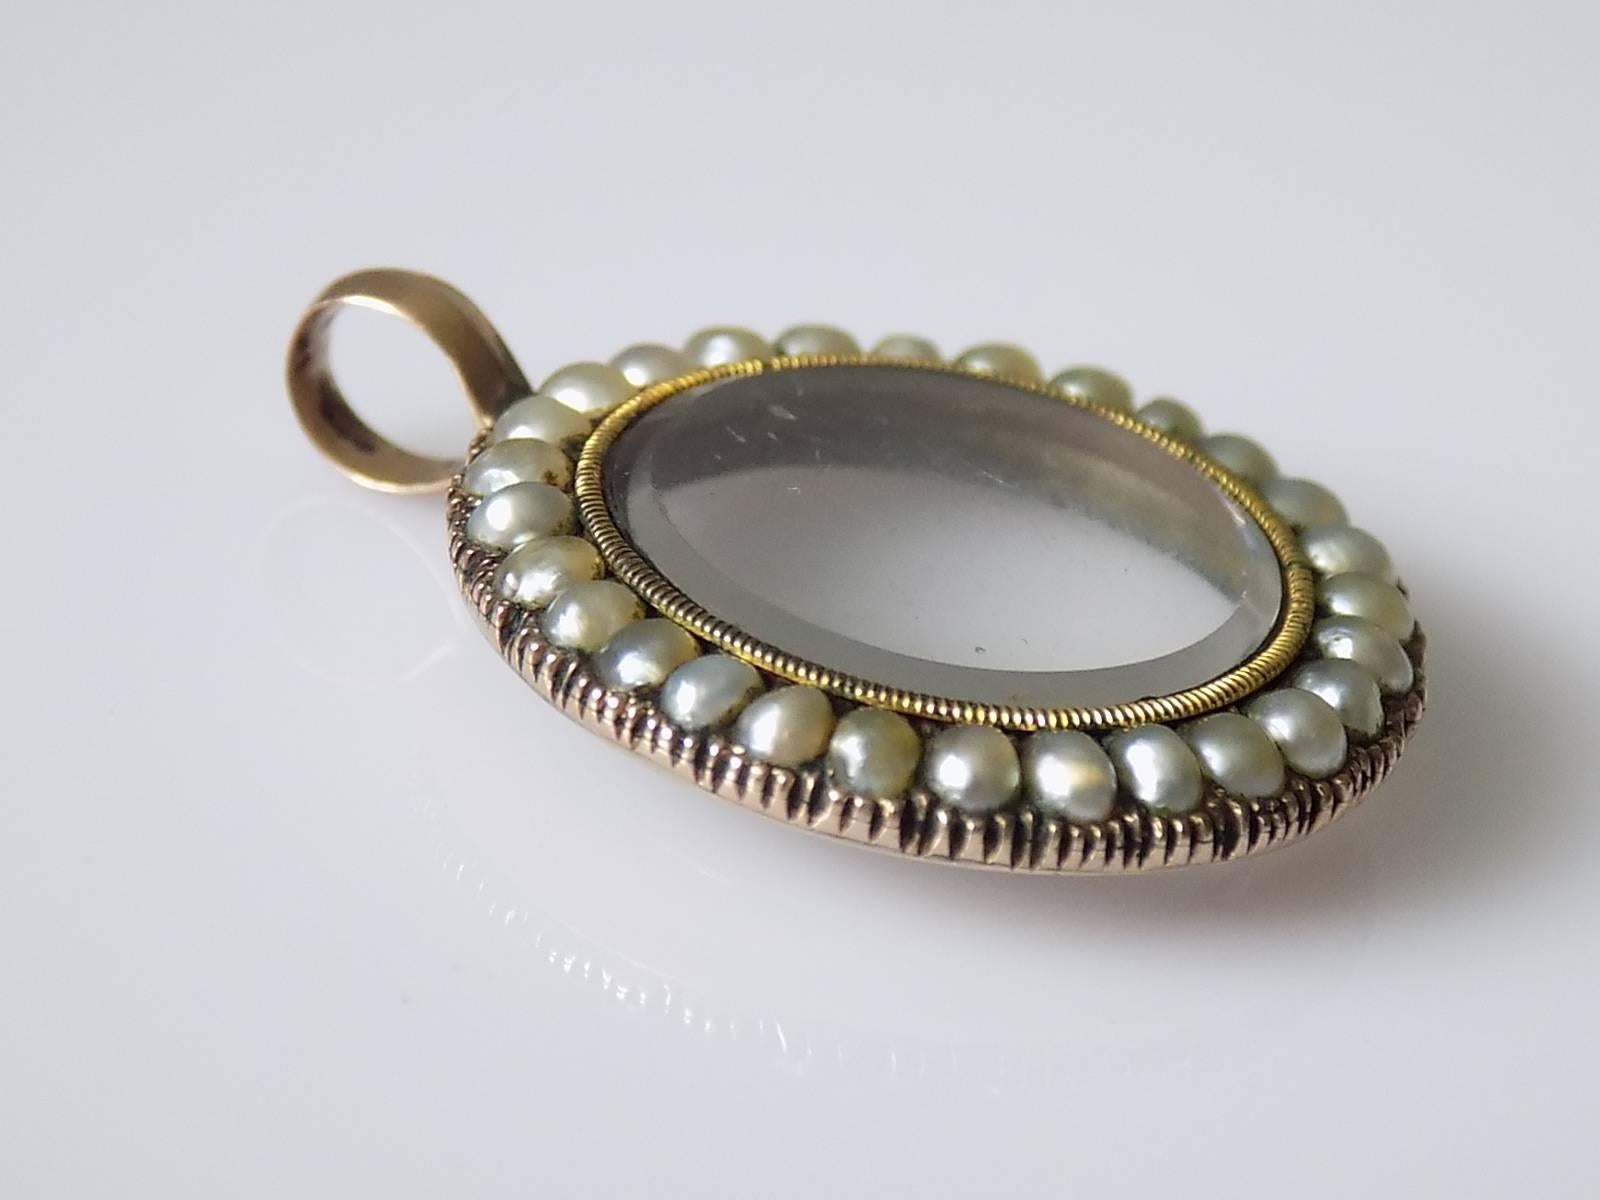 A Lovely Georgian c.1820 split Natural Seed Pearl glazed locket pendant in 9 Carat Gold. English origin.
Drop including bale 35mm
Width 27mm.
Width of glazed locket 20mm.
Unmarked, tested 9 Carat Gold.
Locket in very good working order, glass with a